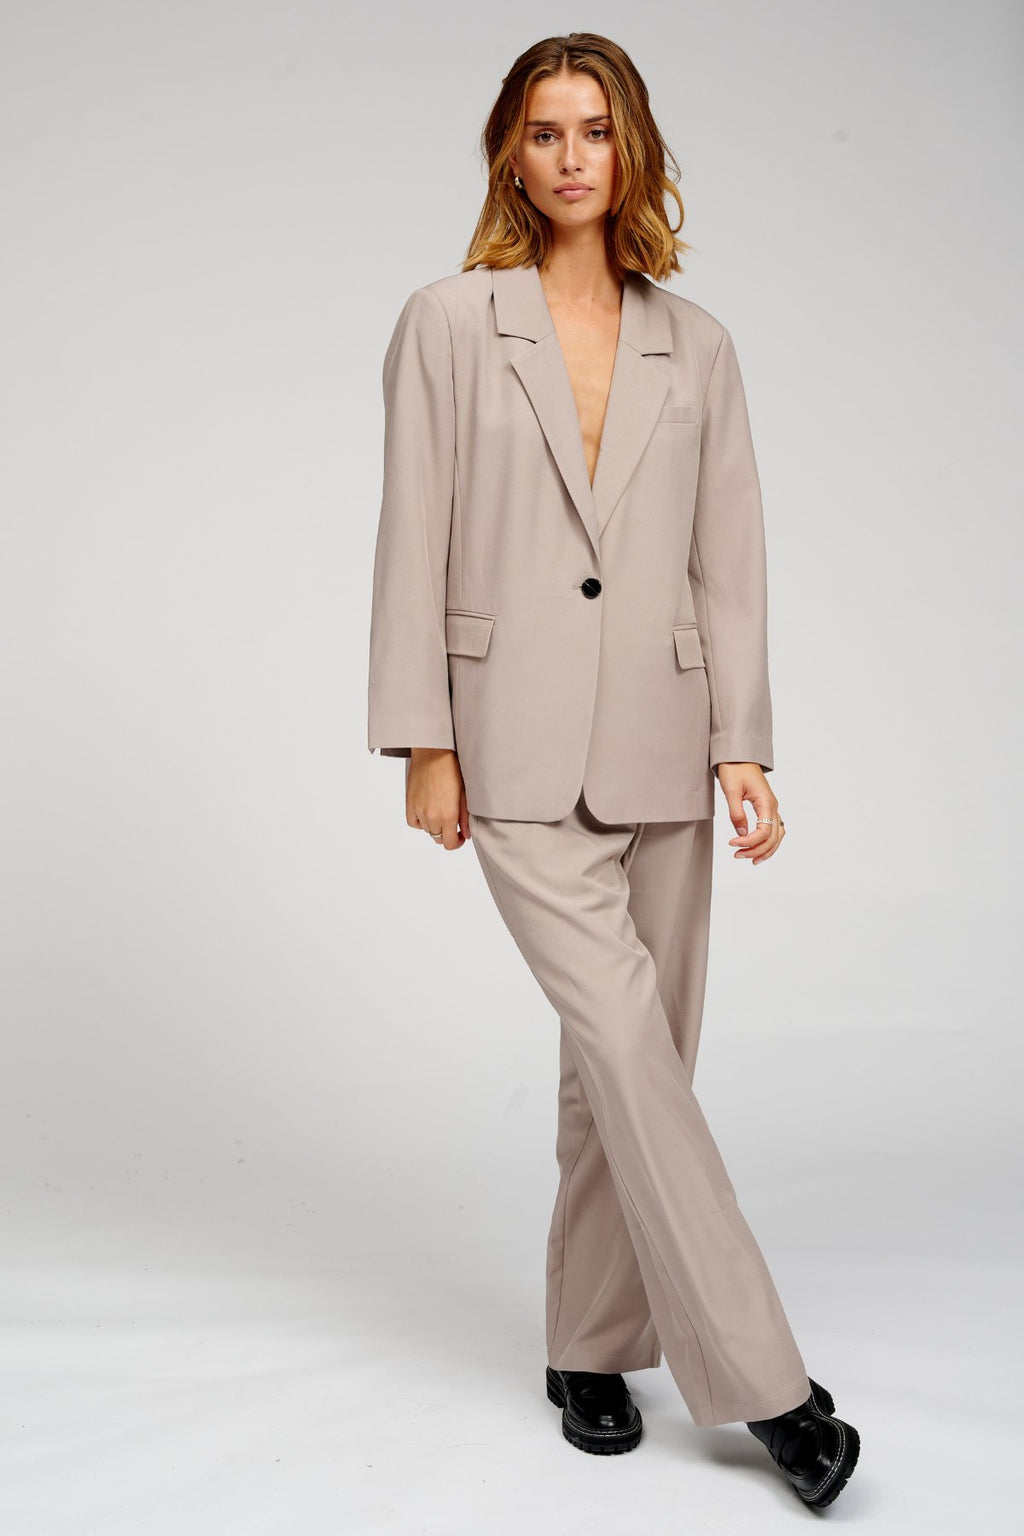 Oversized Suit (Grey) - Package Deal